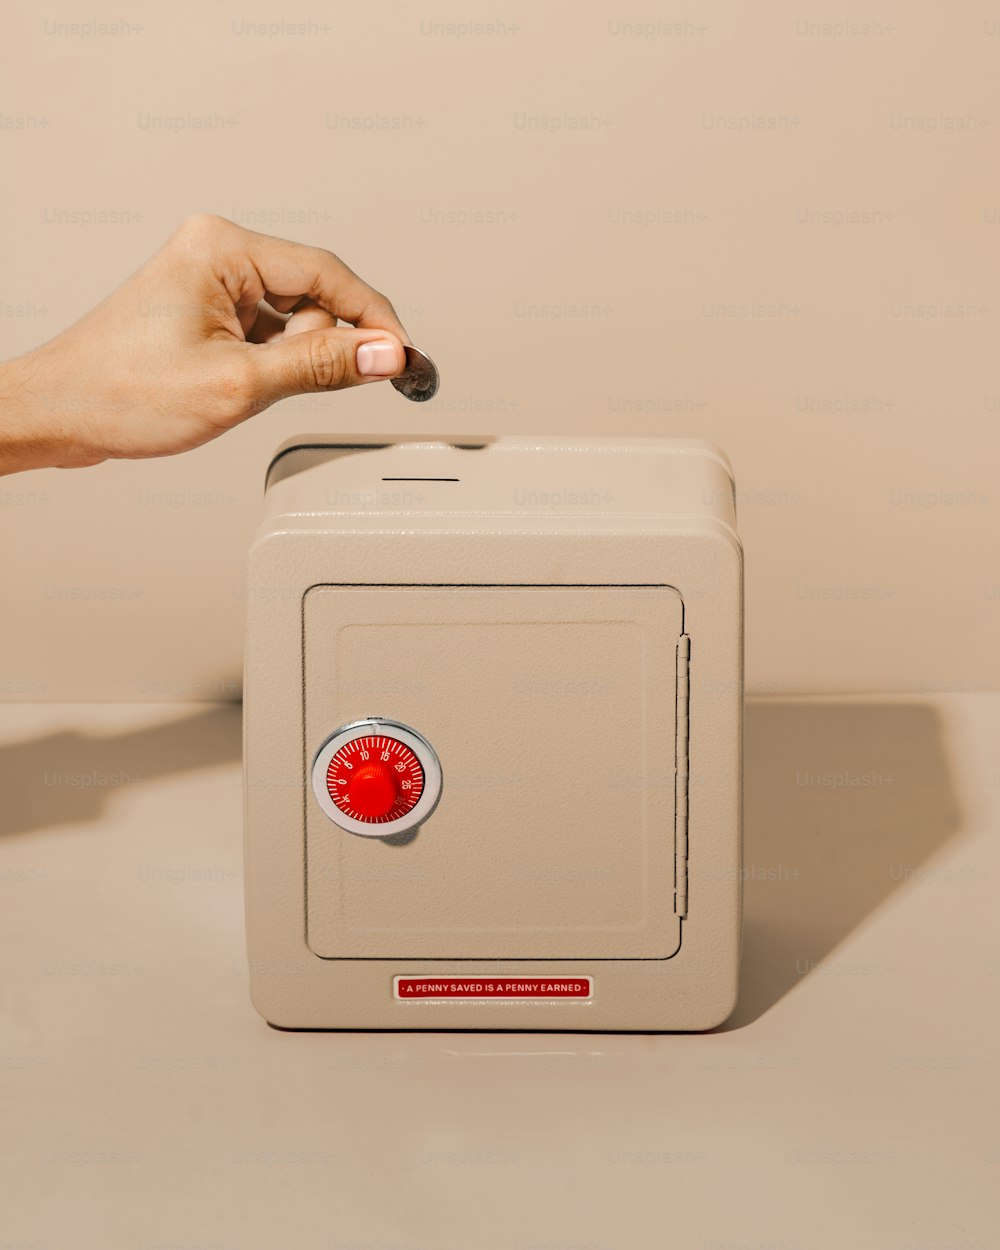 a person's hand reaching for a safe box